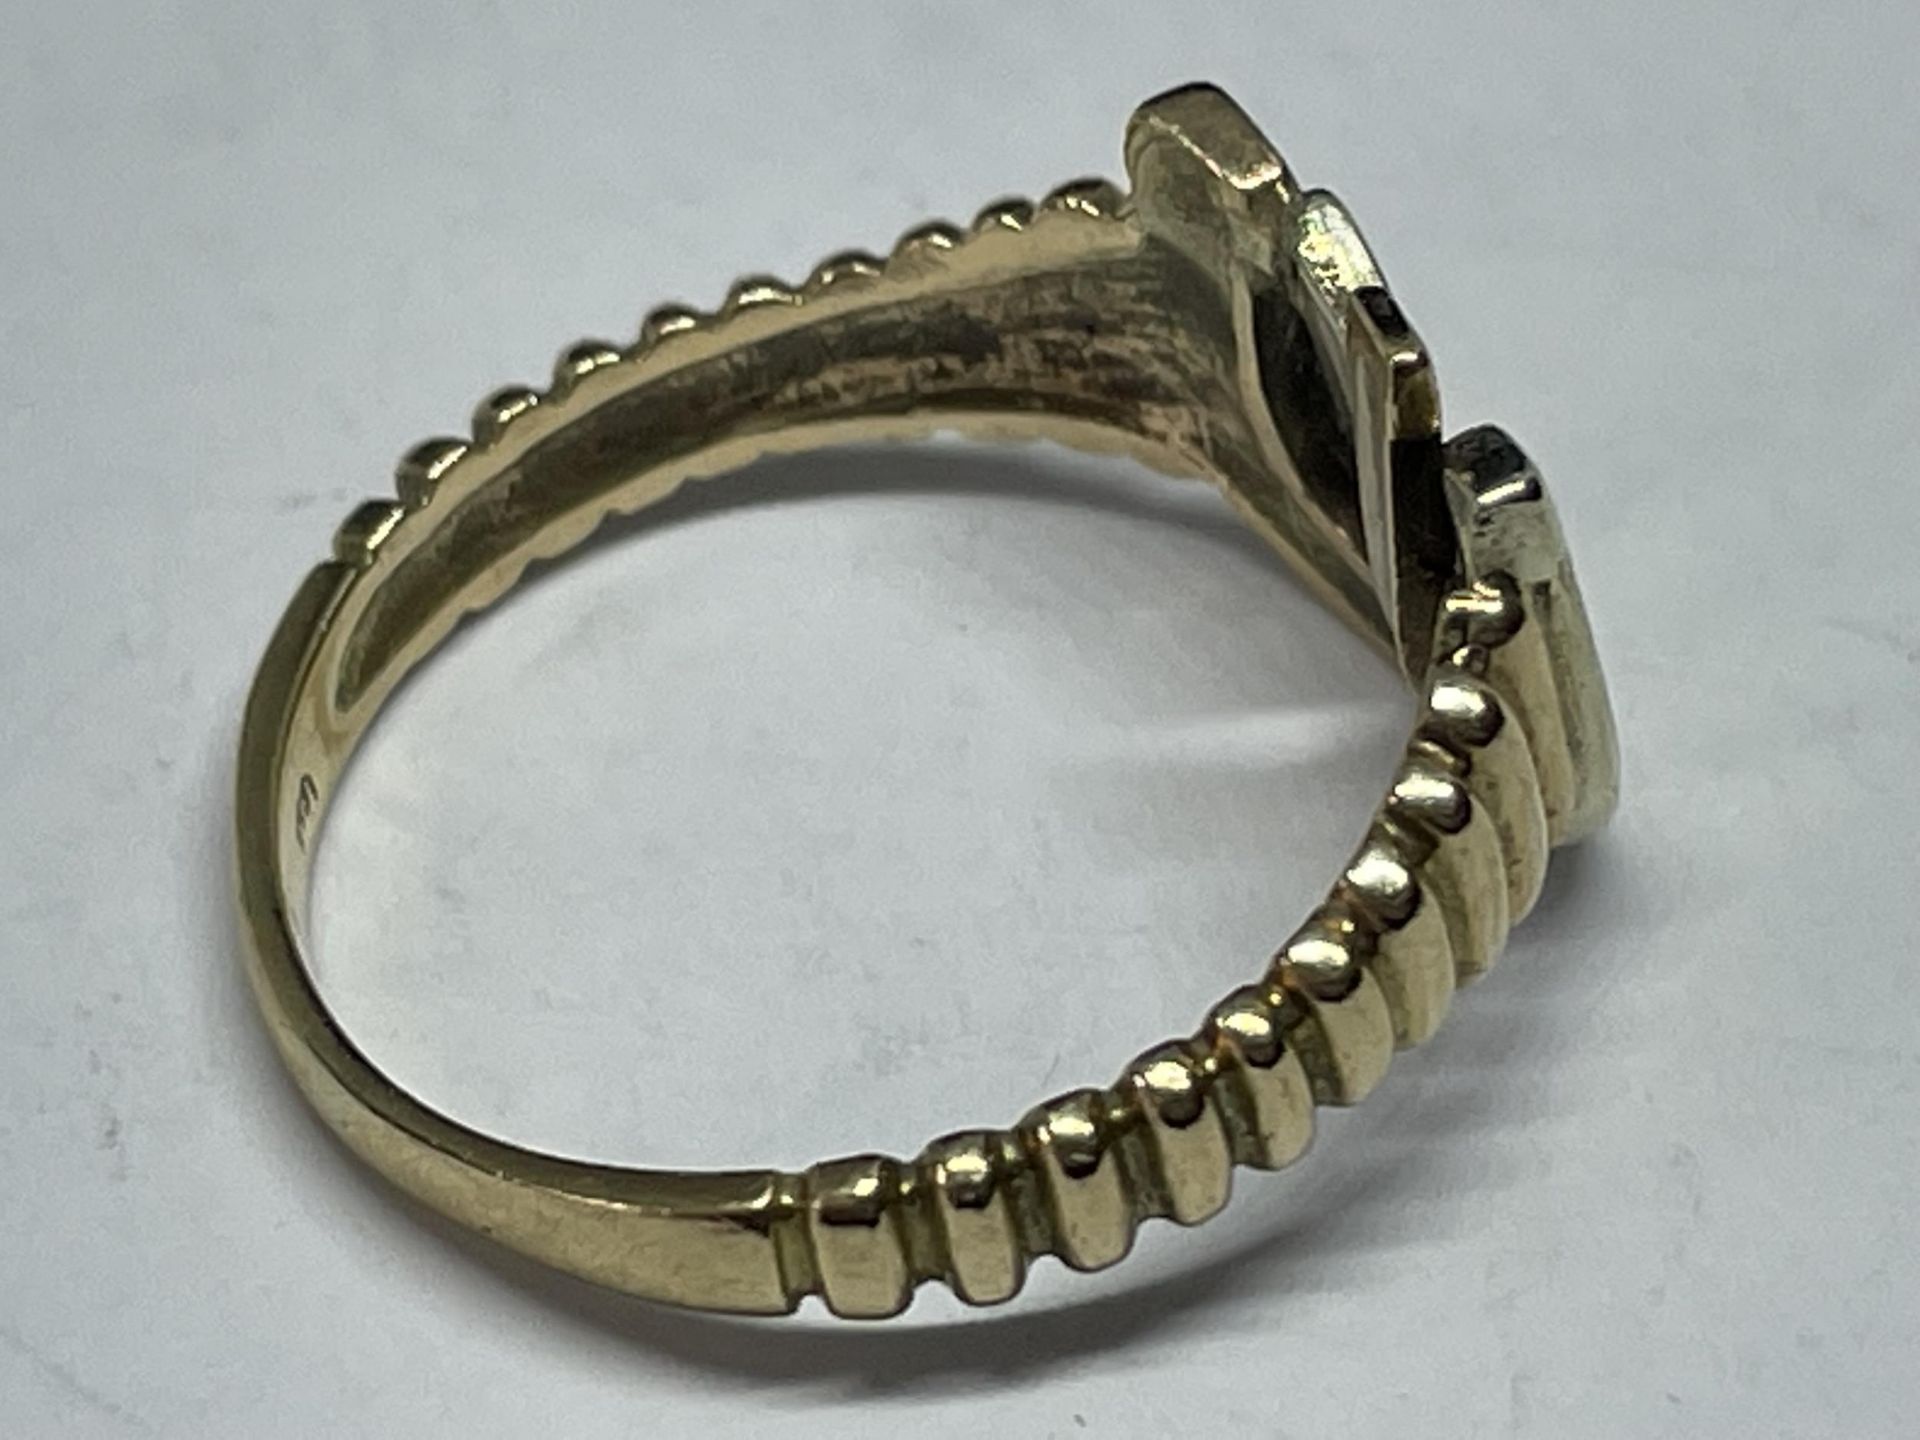 A 9 CARAT GOLD RING WITH HORSESHOE DESIGN GROSS WEIGHT 2.55 GRAMS SIZE M/N - Image 3 of 3